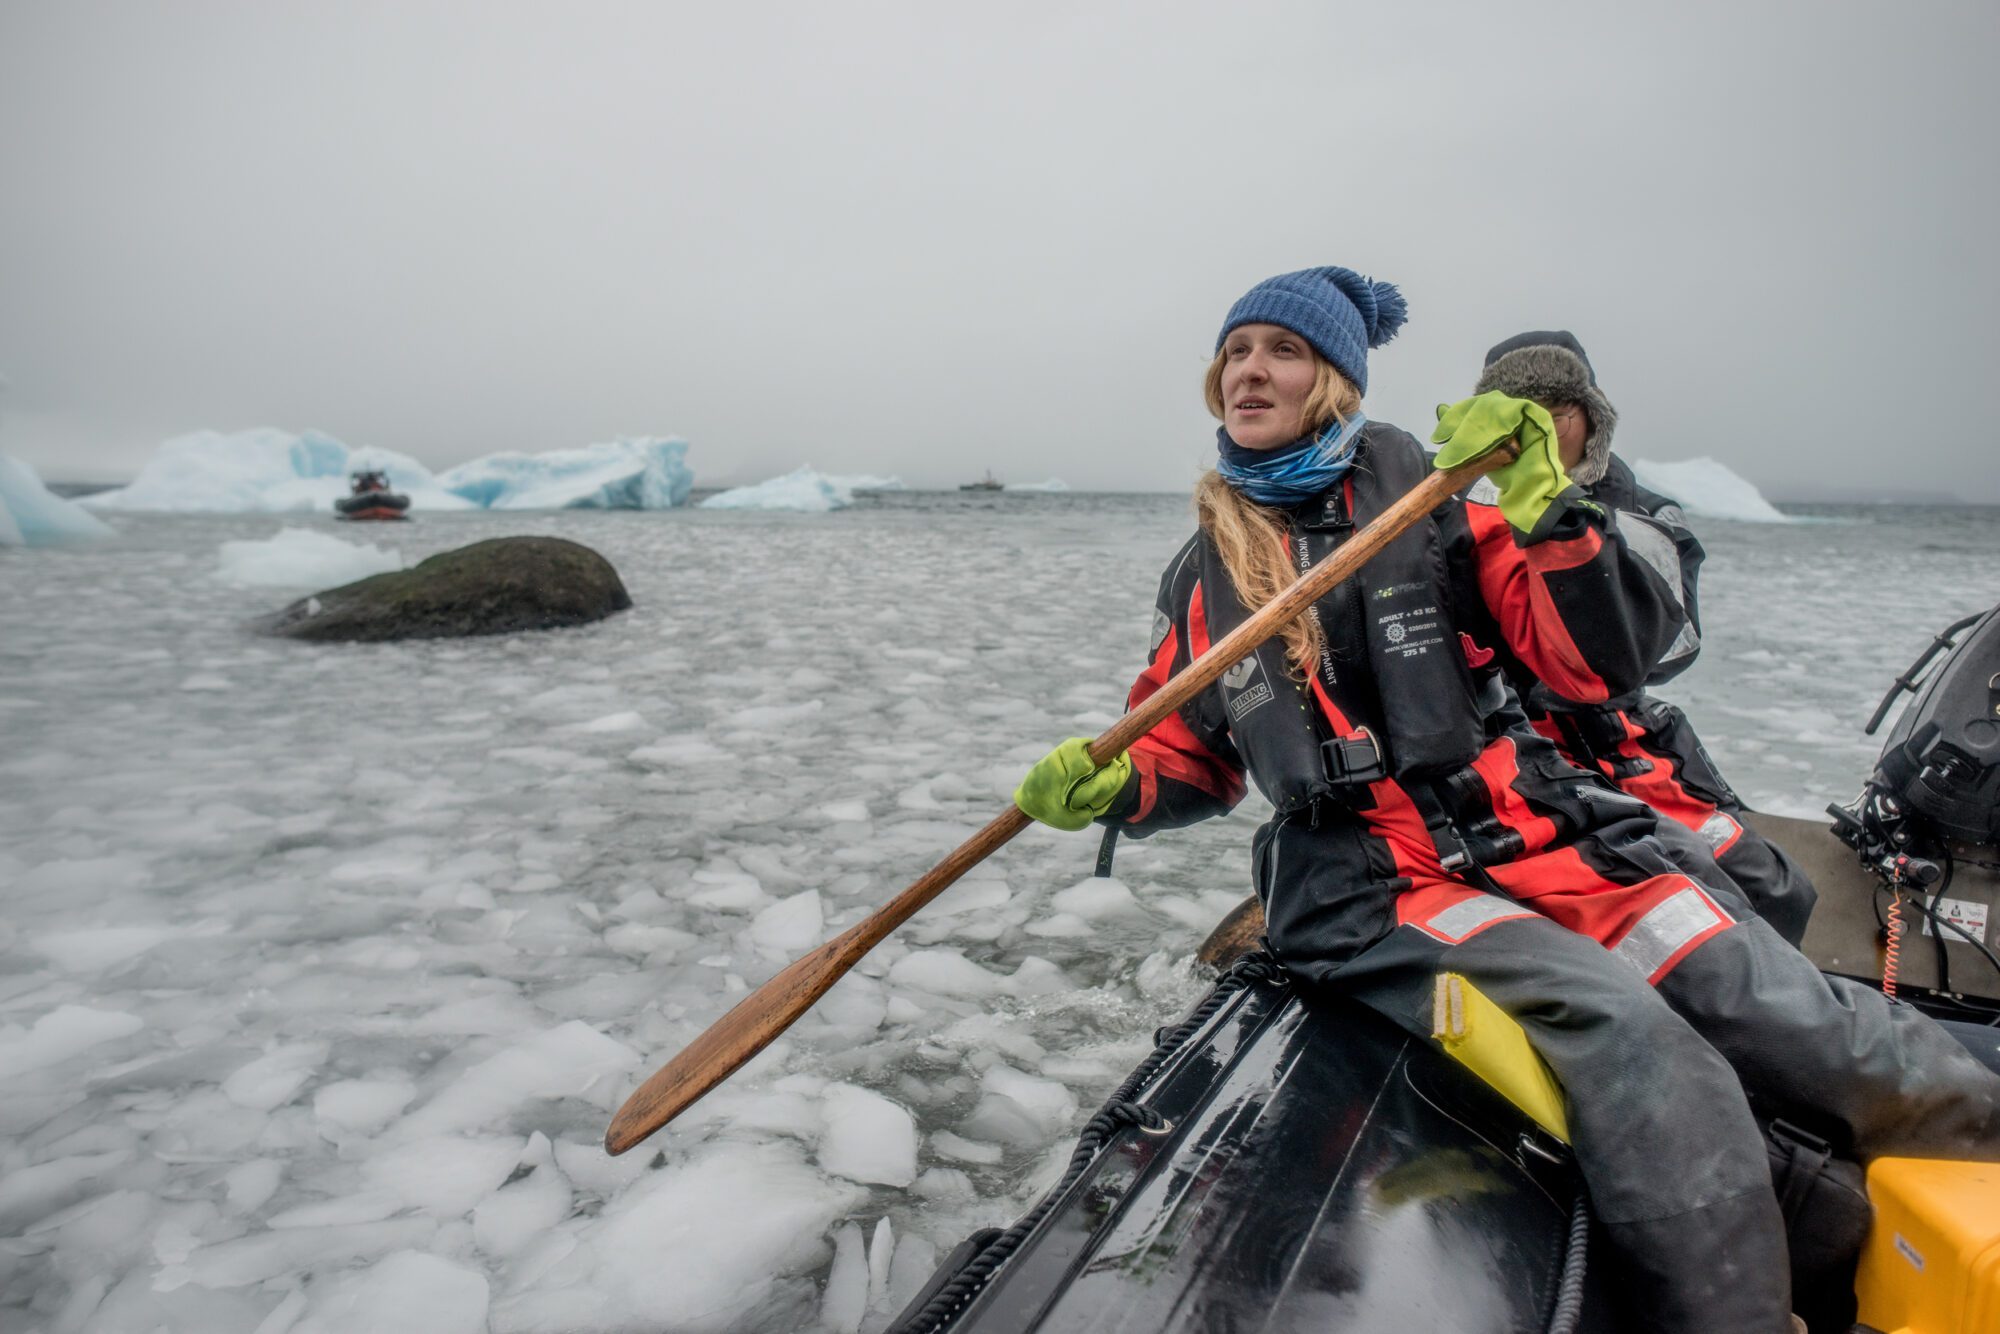 A woman in warm clothing uses a wooden oar to help propel a boat along icy waters.